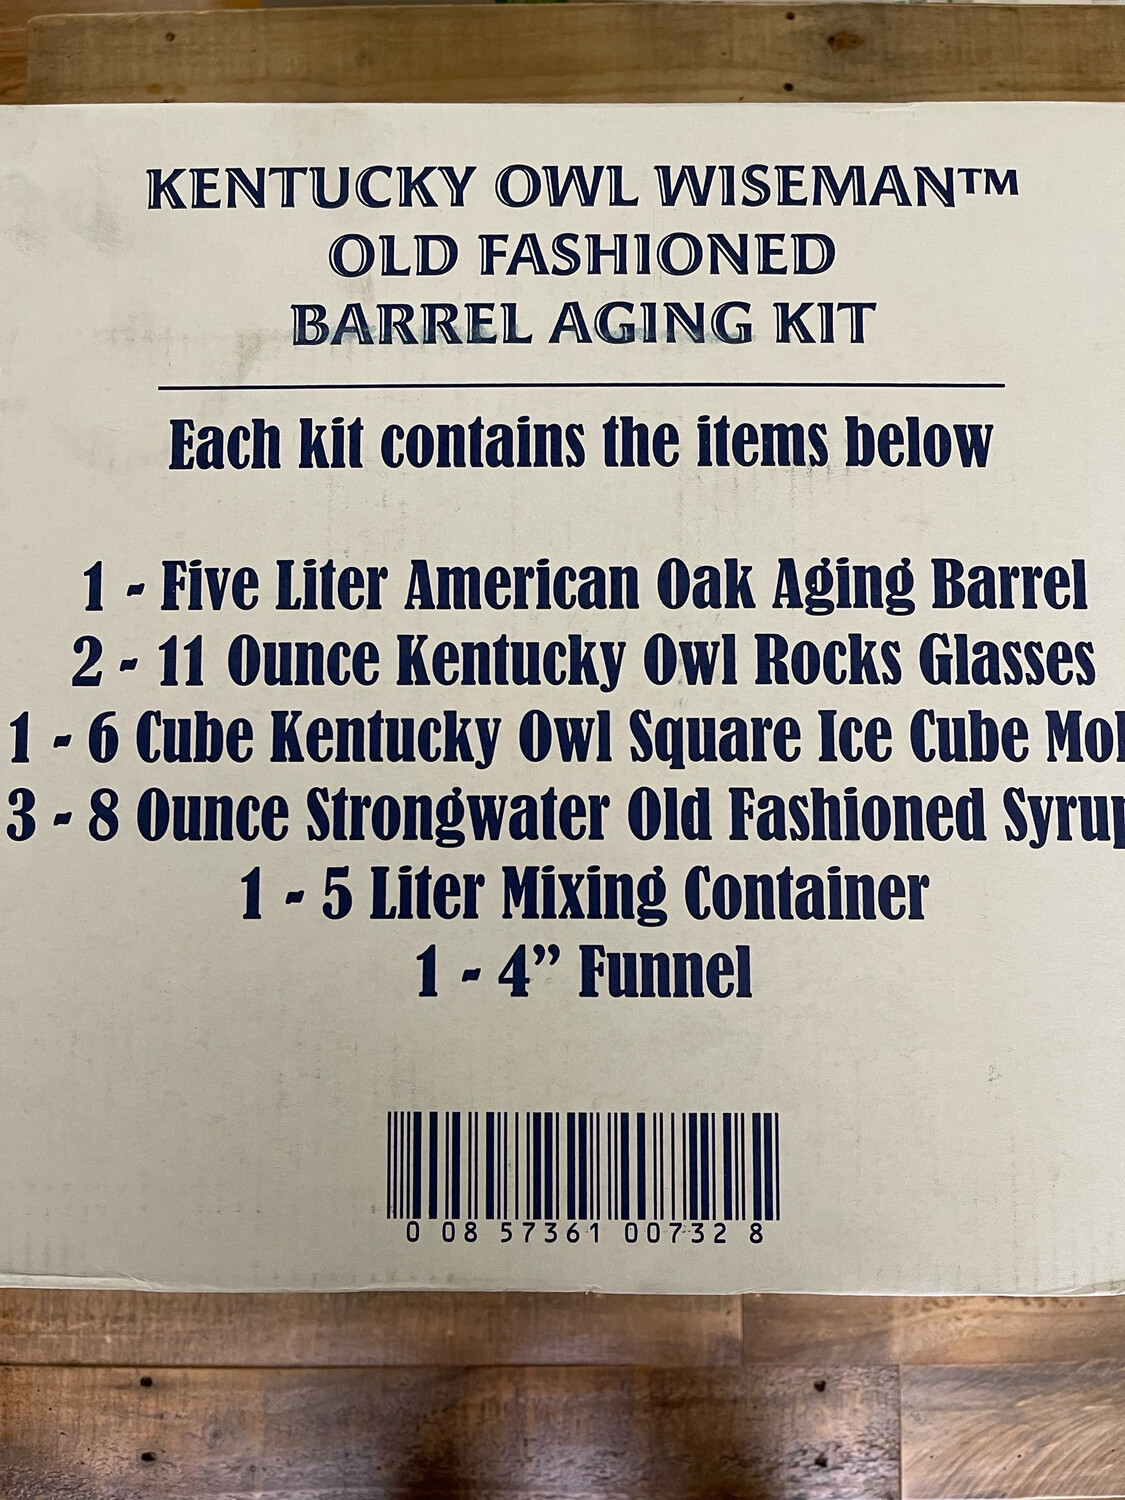 Kentucky Owl Old Fashioned Barrel Aging Kit